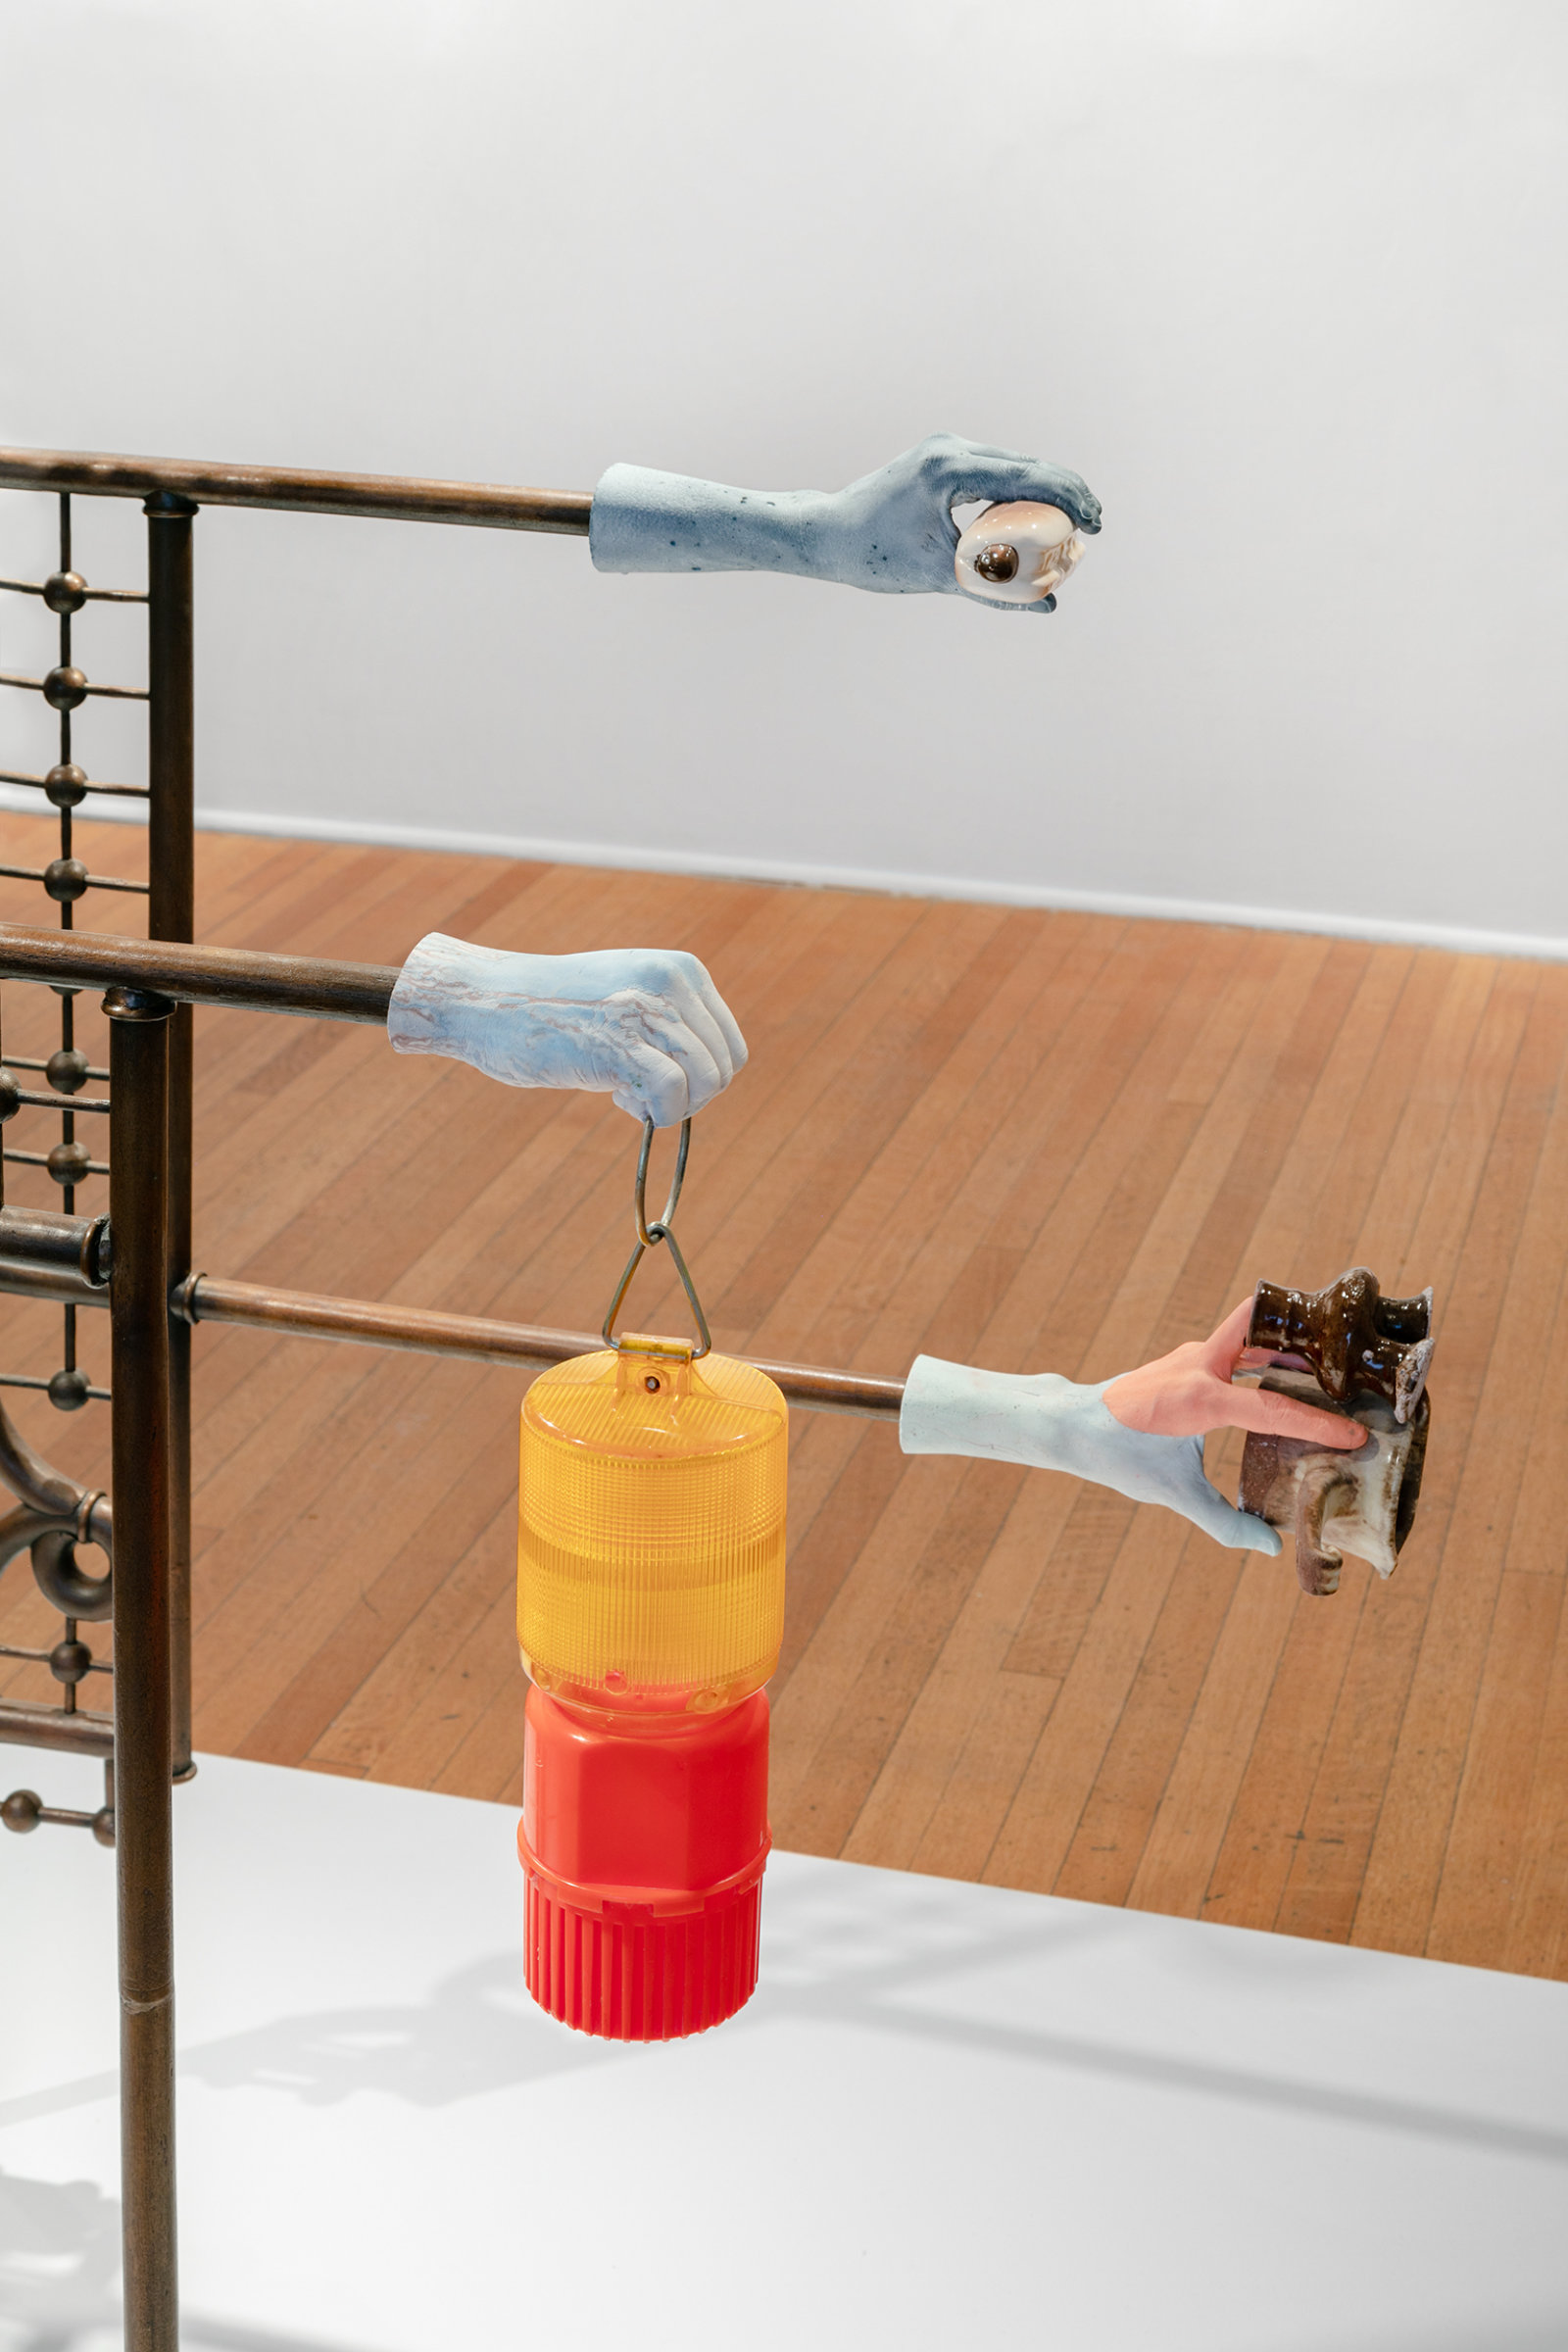 Valérie Blass, Meuble mécanique (detail), 2012, bronze, found objects, ductal, fgr, epoxy, 80 x 54 x 27 in. (203 x 137 x 69 cm). Installation view, The Mime, the Model and the Dupe, Oakville Galleries, Oakville, 2019